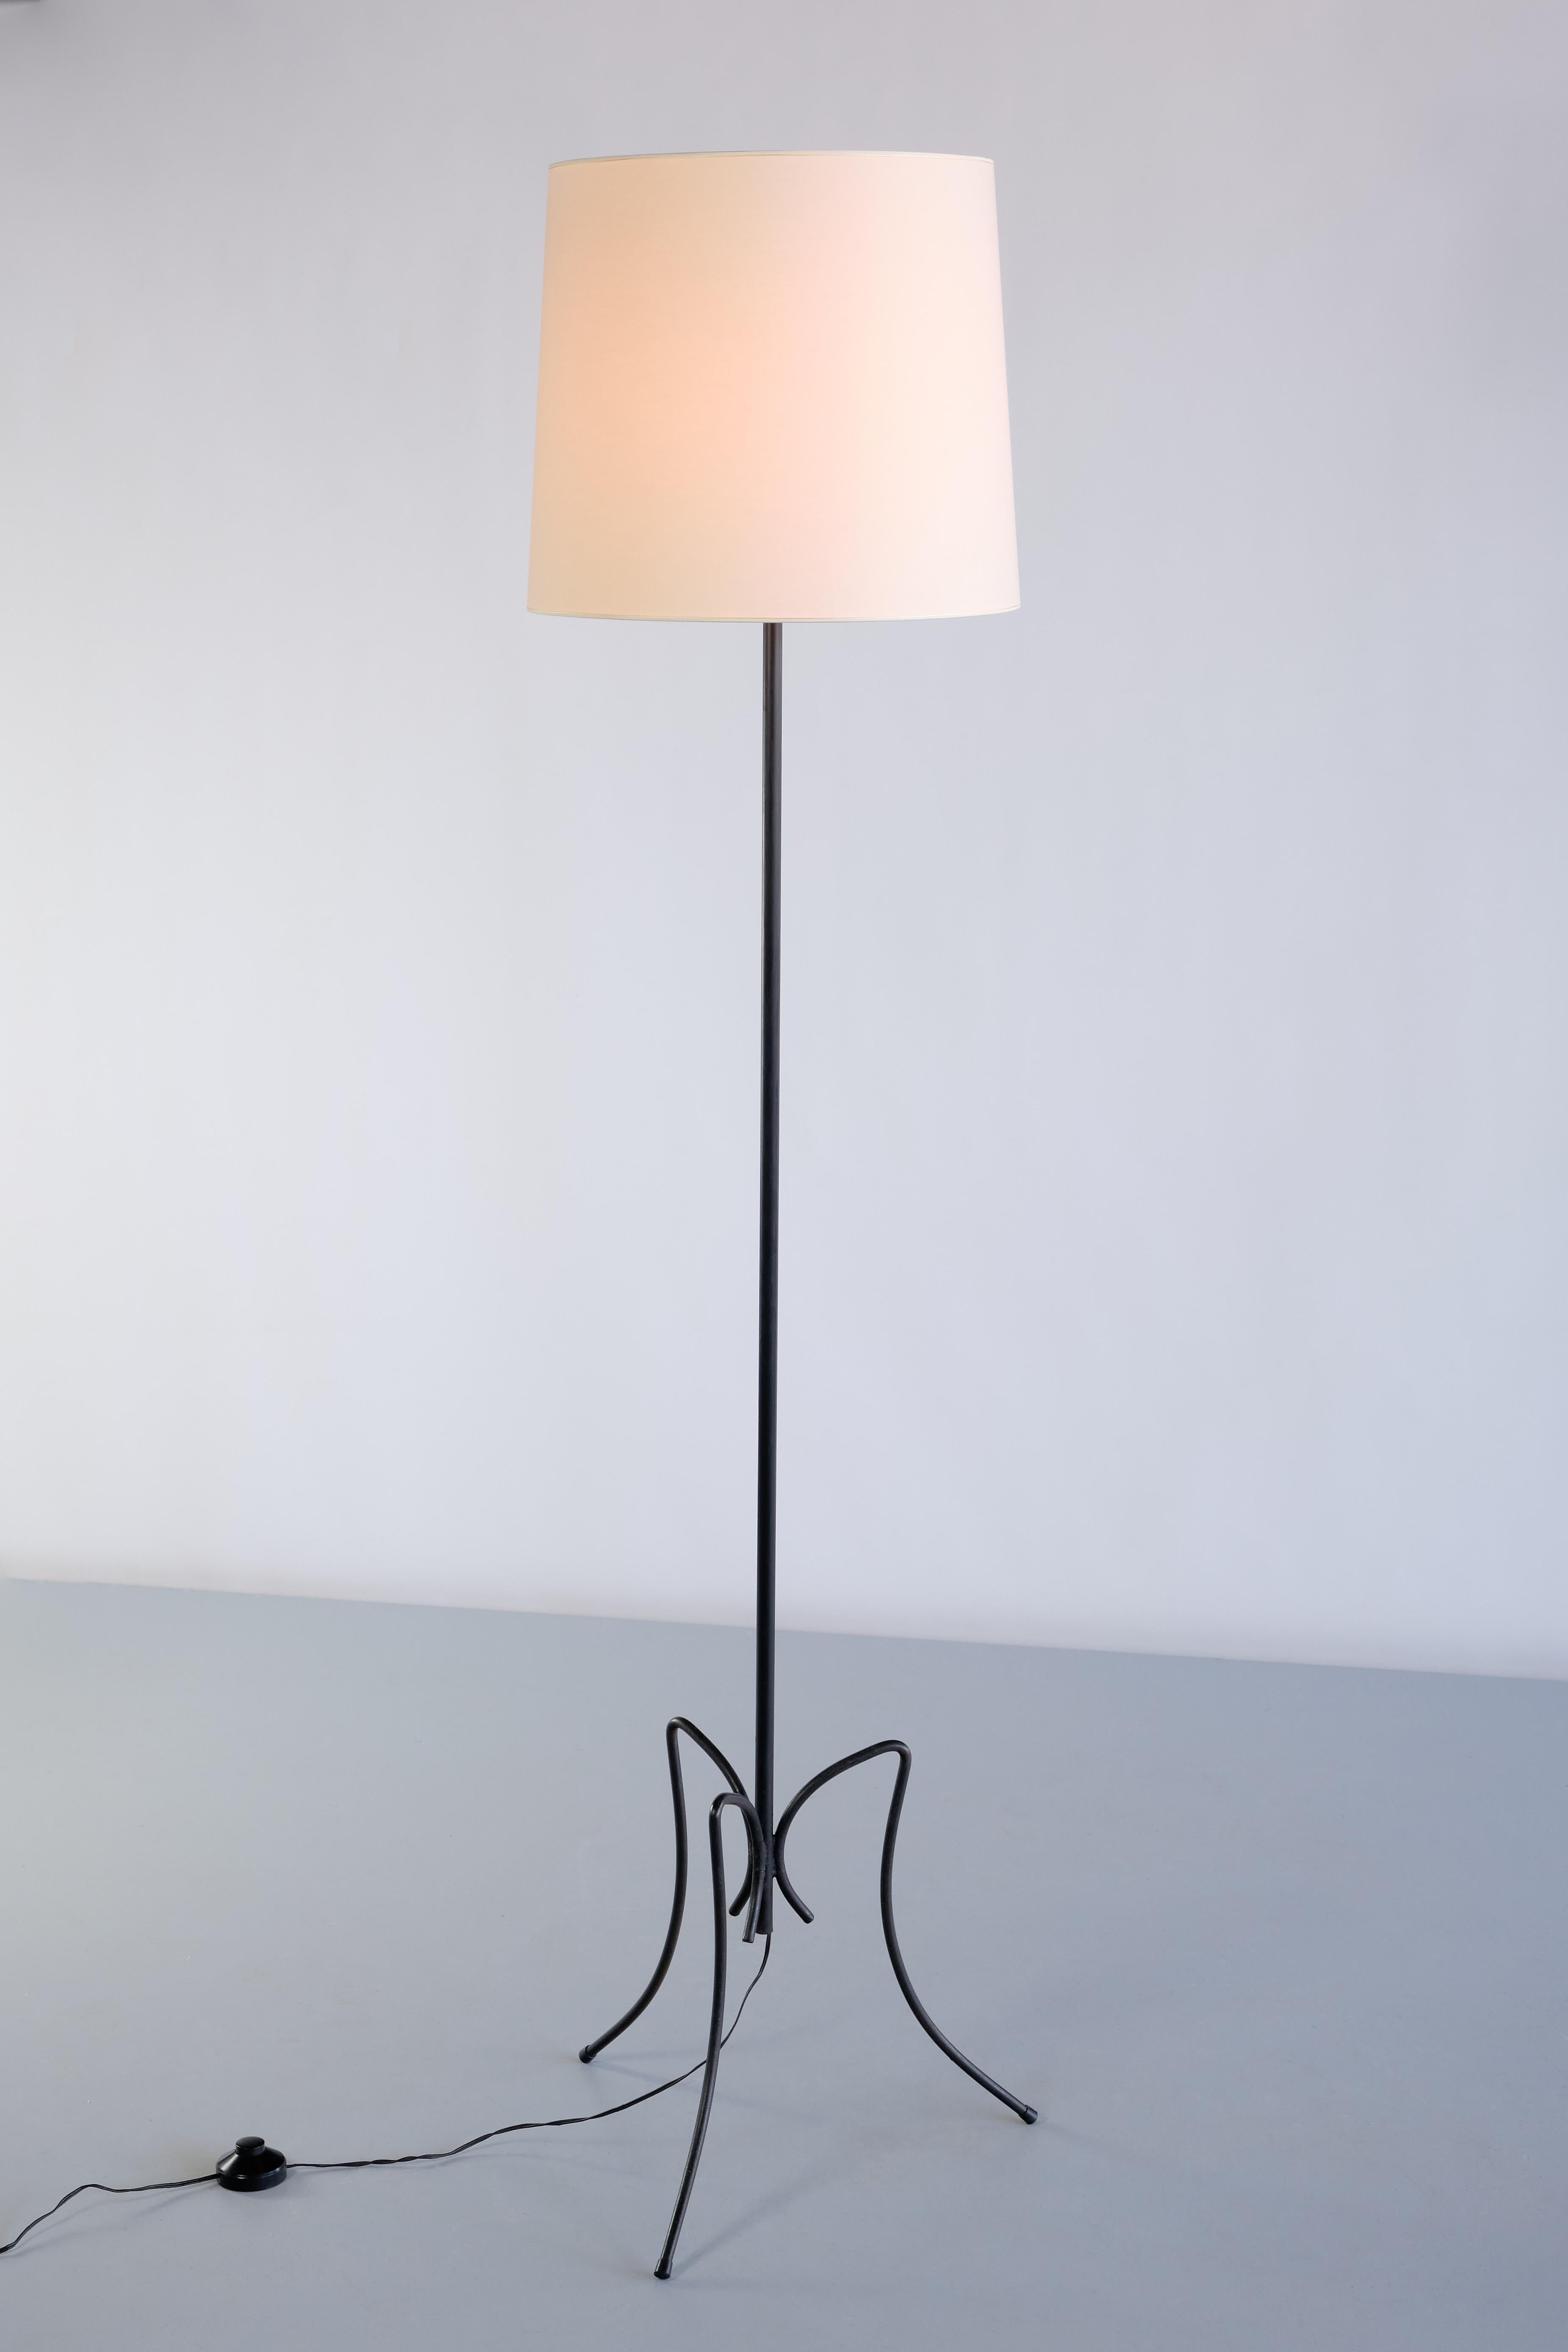 This striking floor lamp was produced in France in the early 1950s. The lamp consists of a three legged base and thin stem, all in black lacquered iron. The iron outward bending legs in a curved movement give the lamp a delicate and elegant